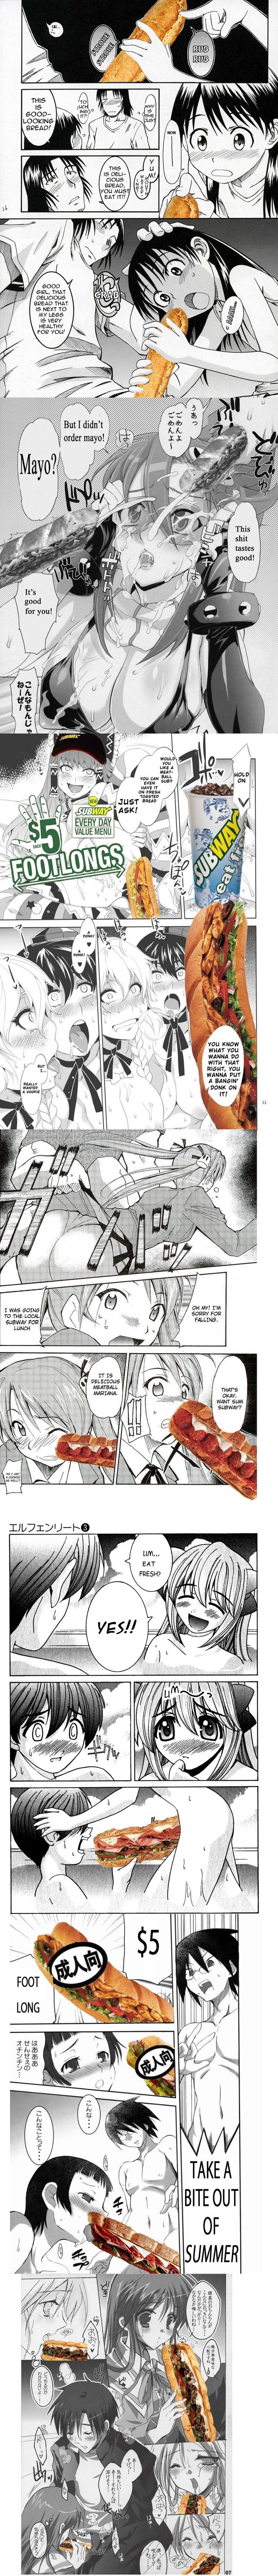 hentai porn pictures funny hentai